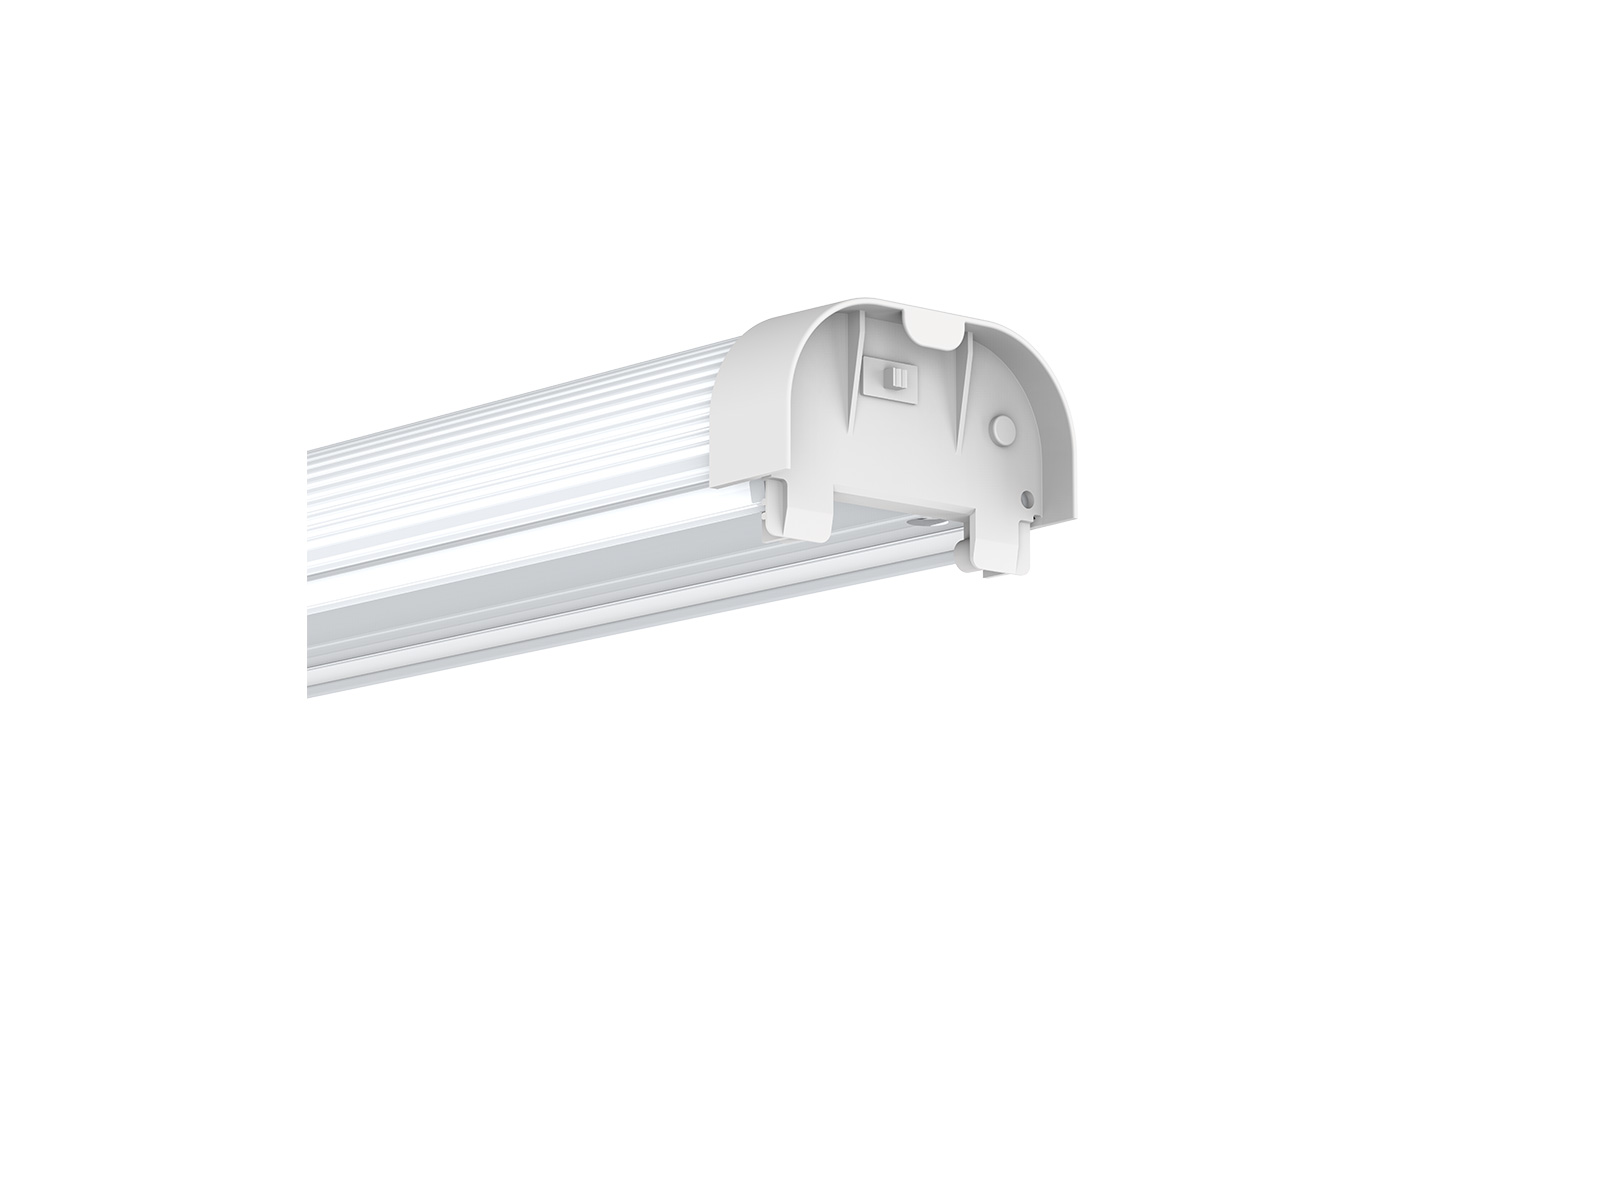 DB96 suspended linear light fixture